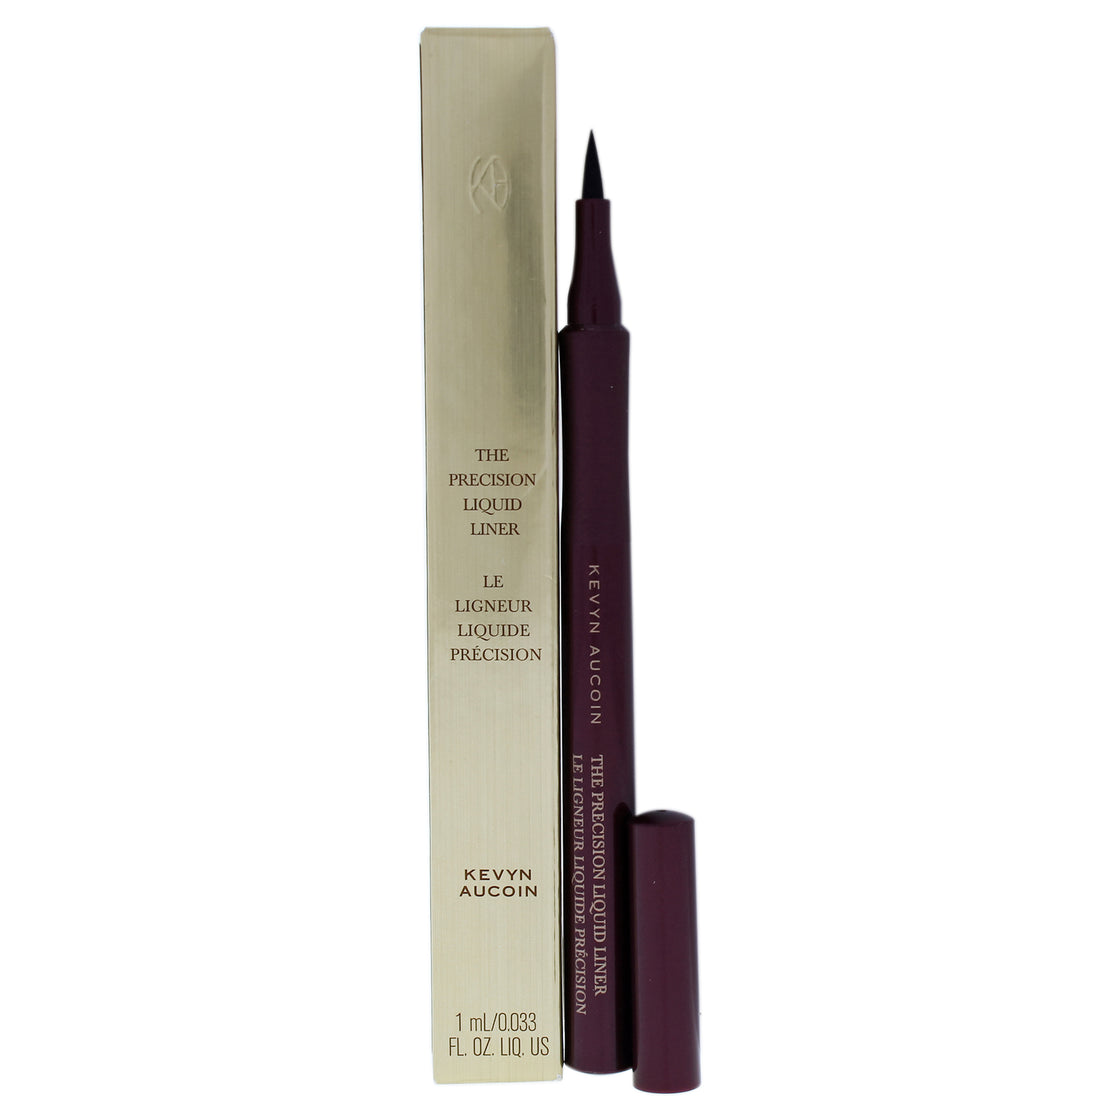 The Precision Liquid Liner - Black by Kevyn Aucoin for Women - 0.033 oz Eyeliner